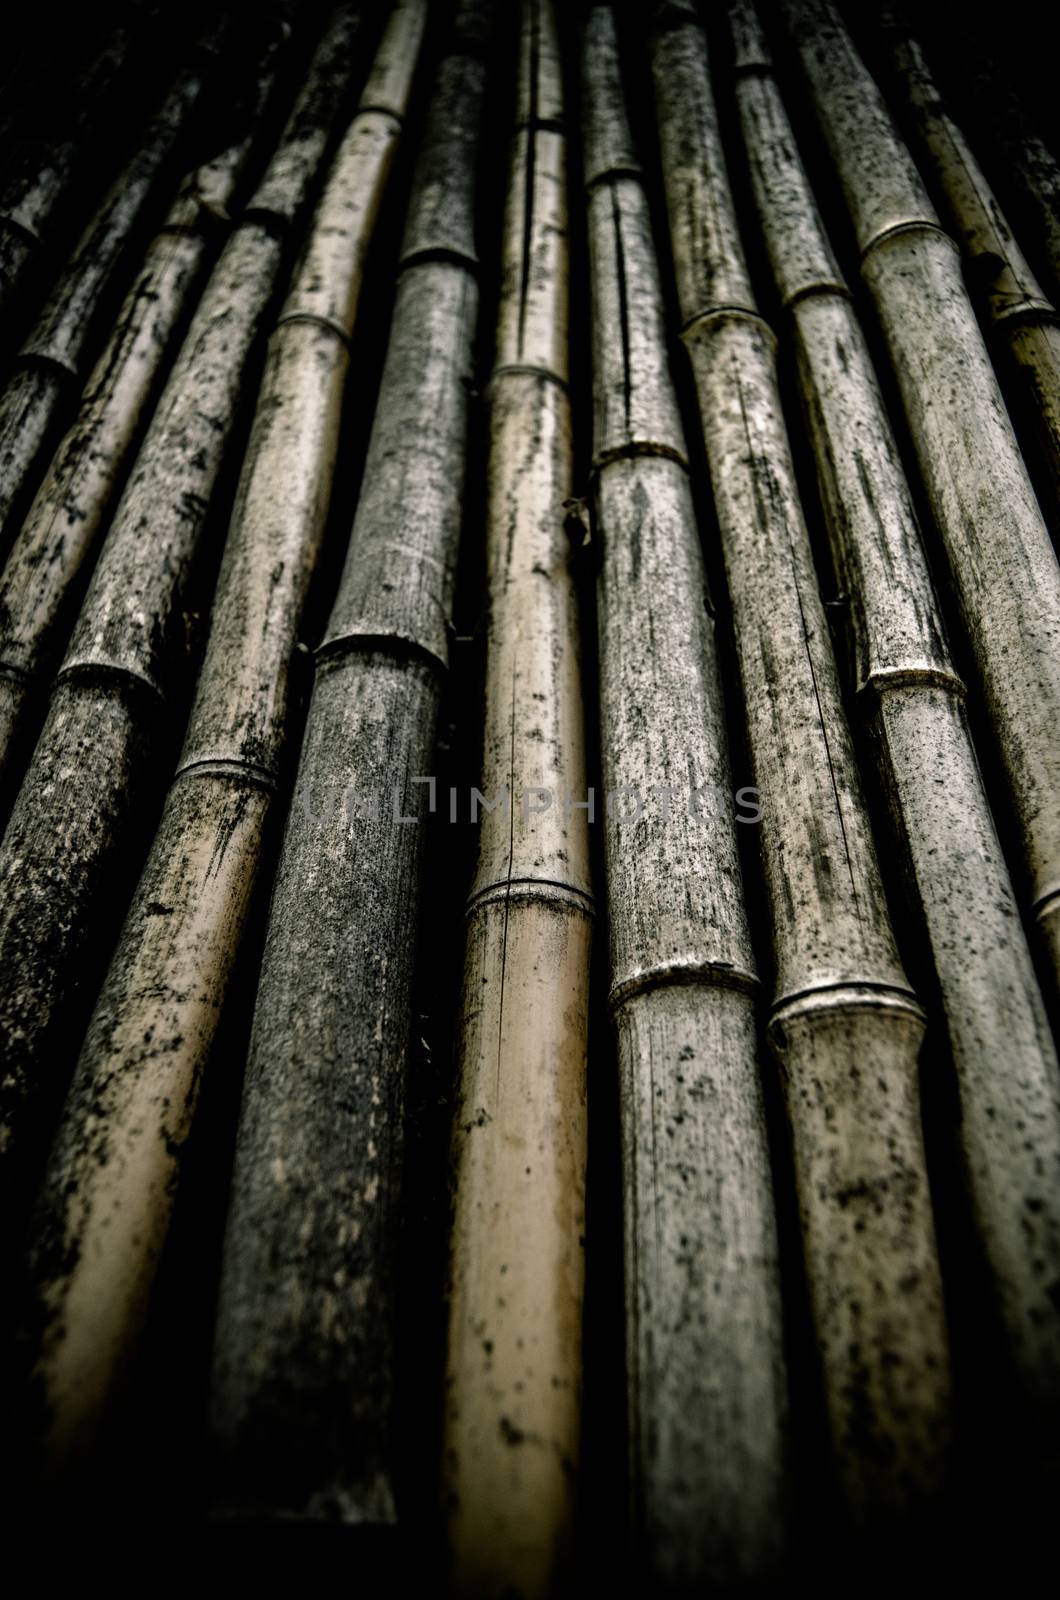 Background Of Dirty Bamboo by mrdoomits